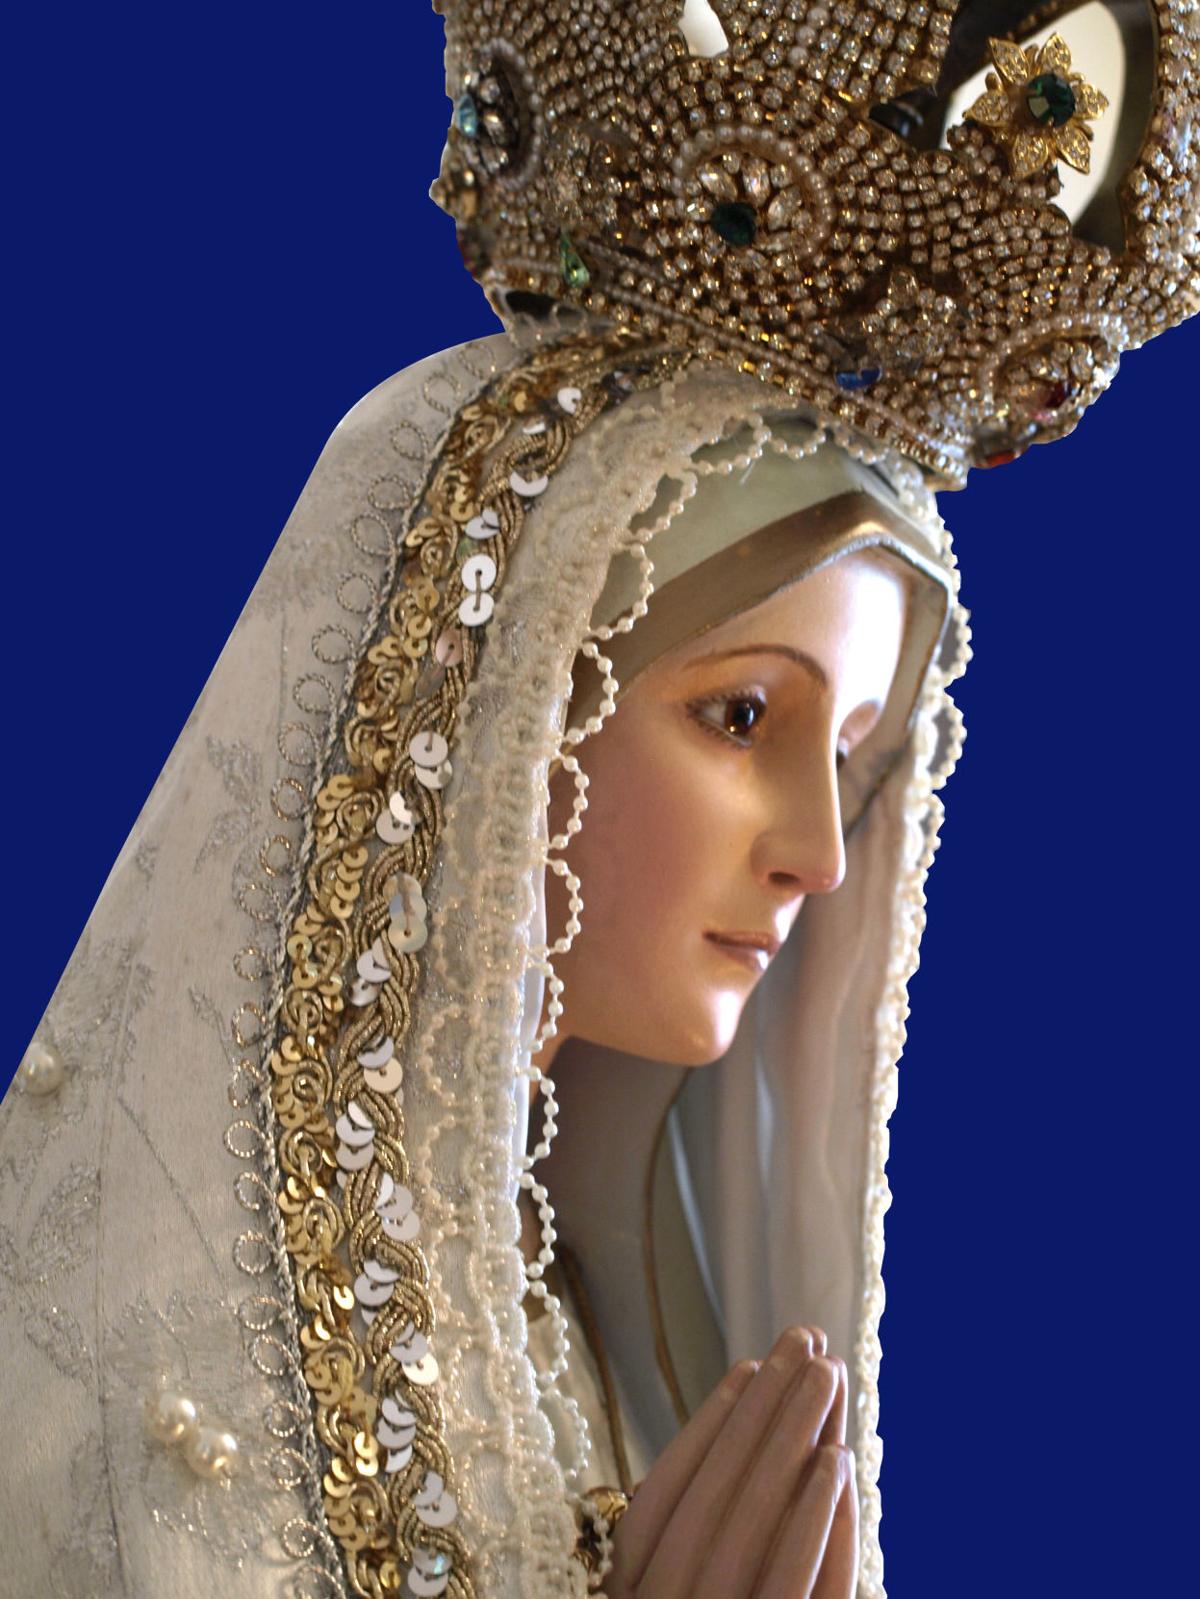 Statue of Our Lady of Fatima will be at Fontana church ...